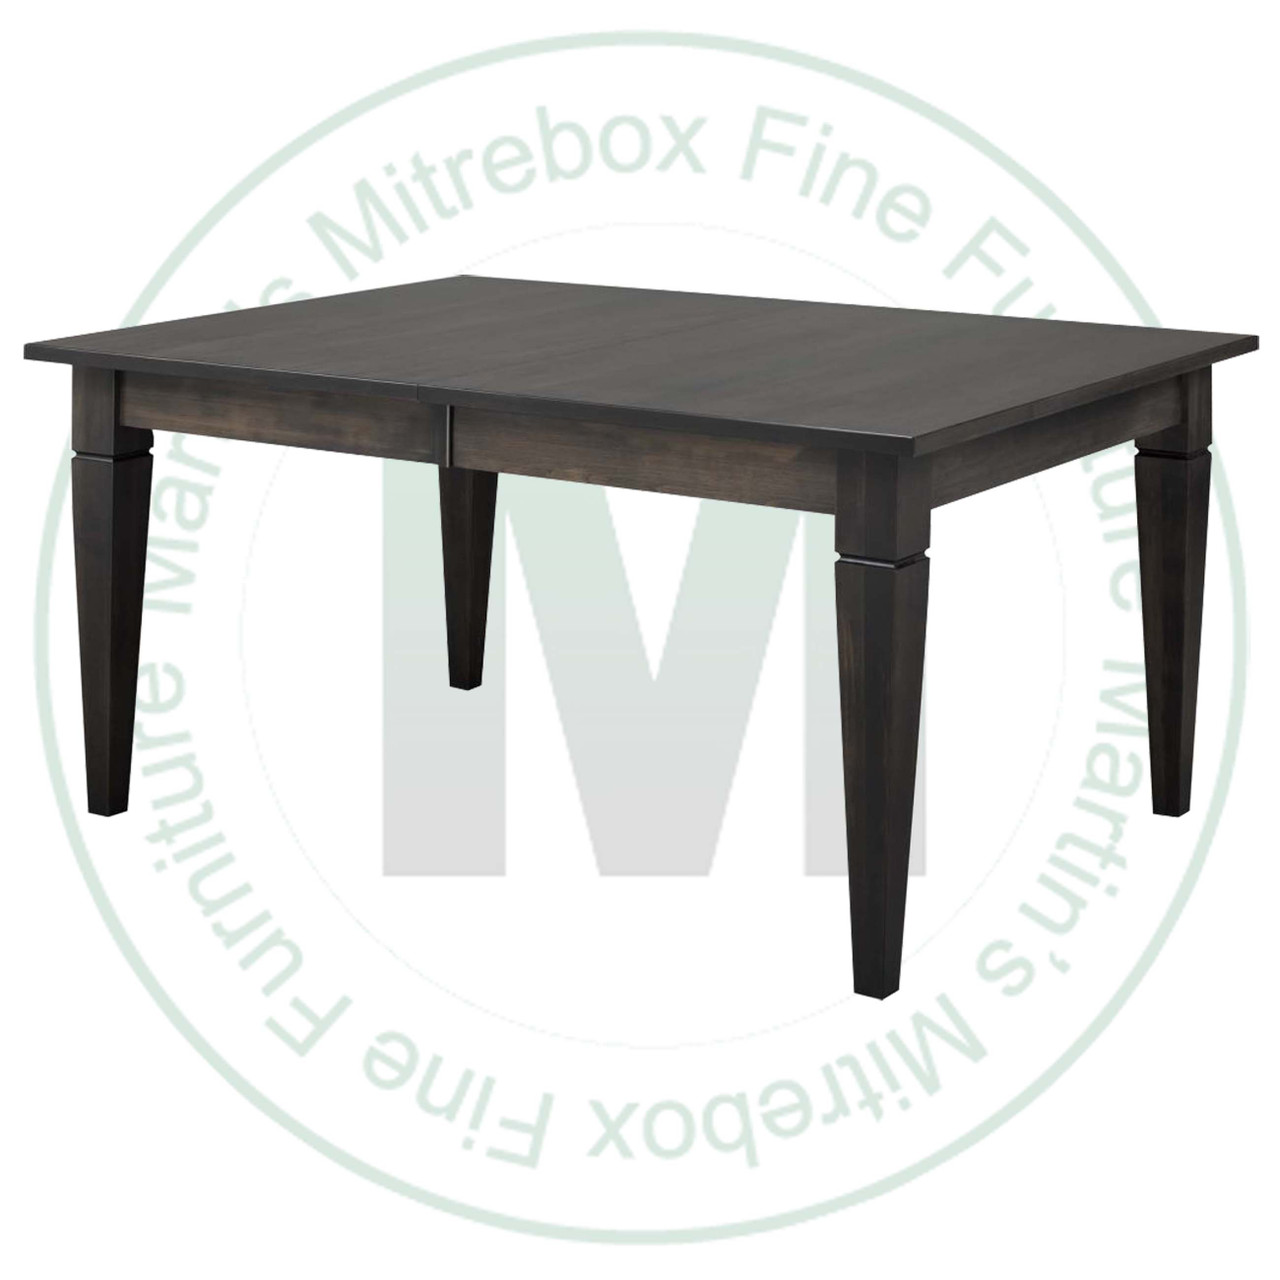 Maple Reesor Extension Harvest Table 36''D x 60''W x 30''H With 3 - 12'' Leaves Table Has 1.25'' Thick Top